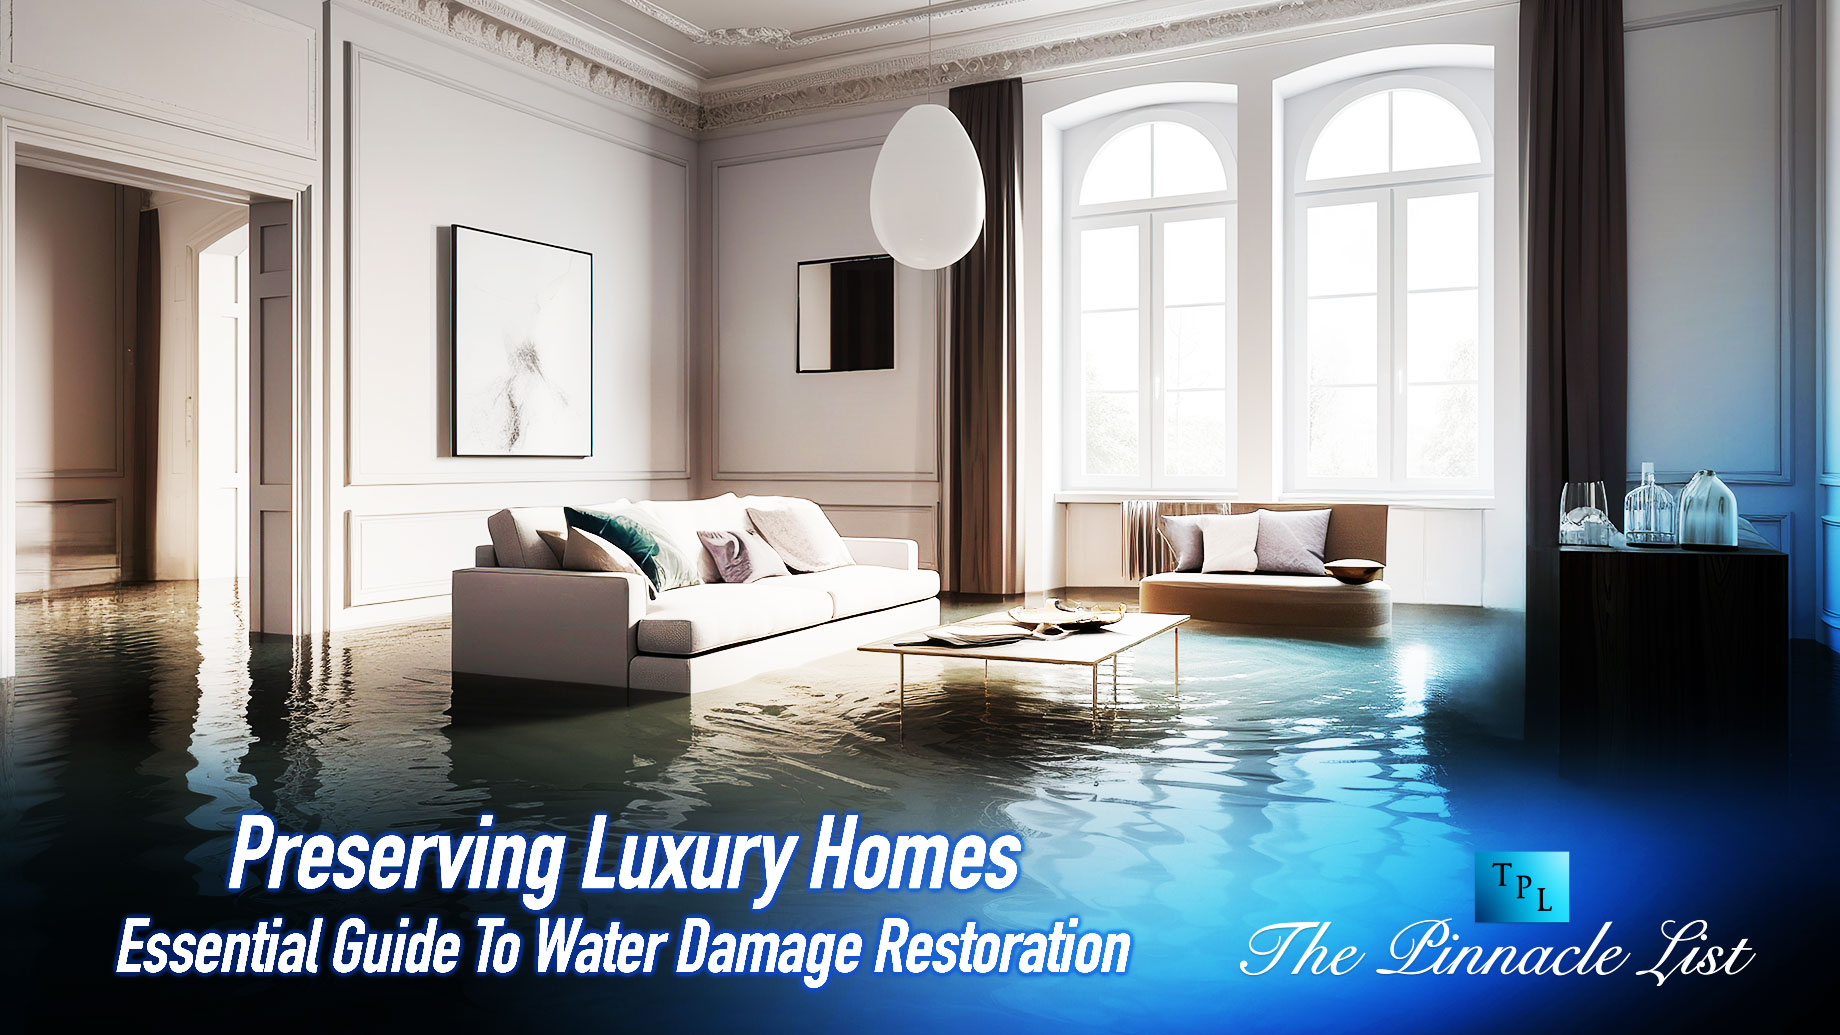 Preserving Luxury Homes: Essential Guide To Water Damage Restoration